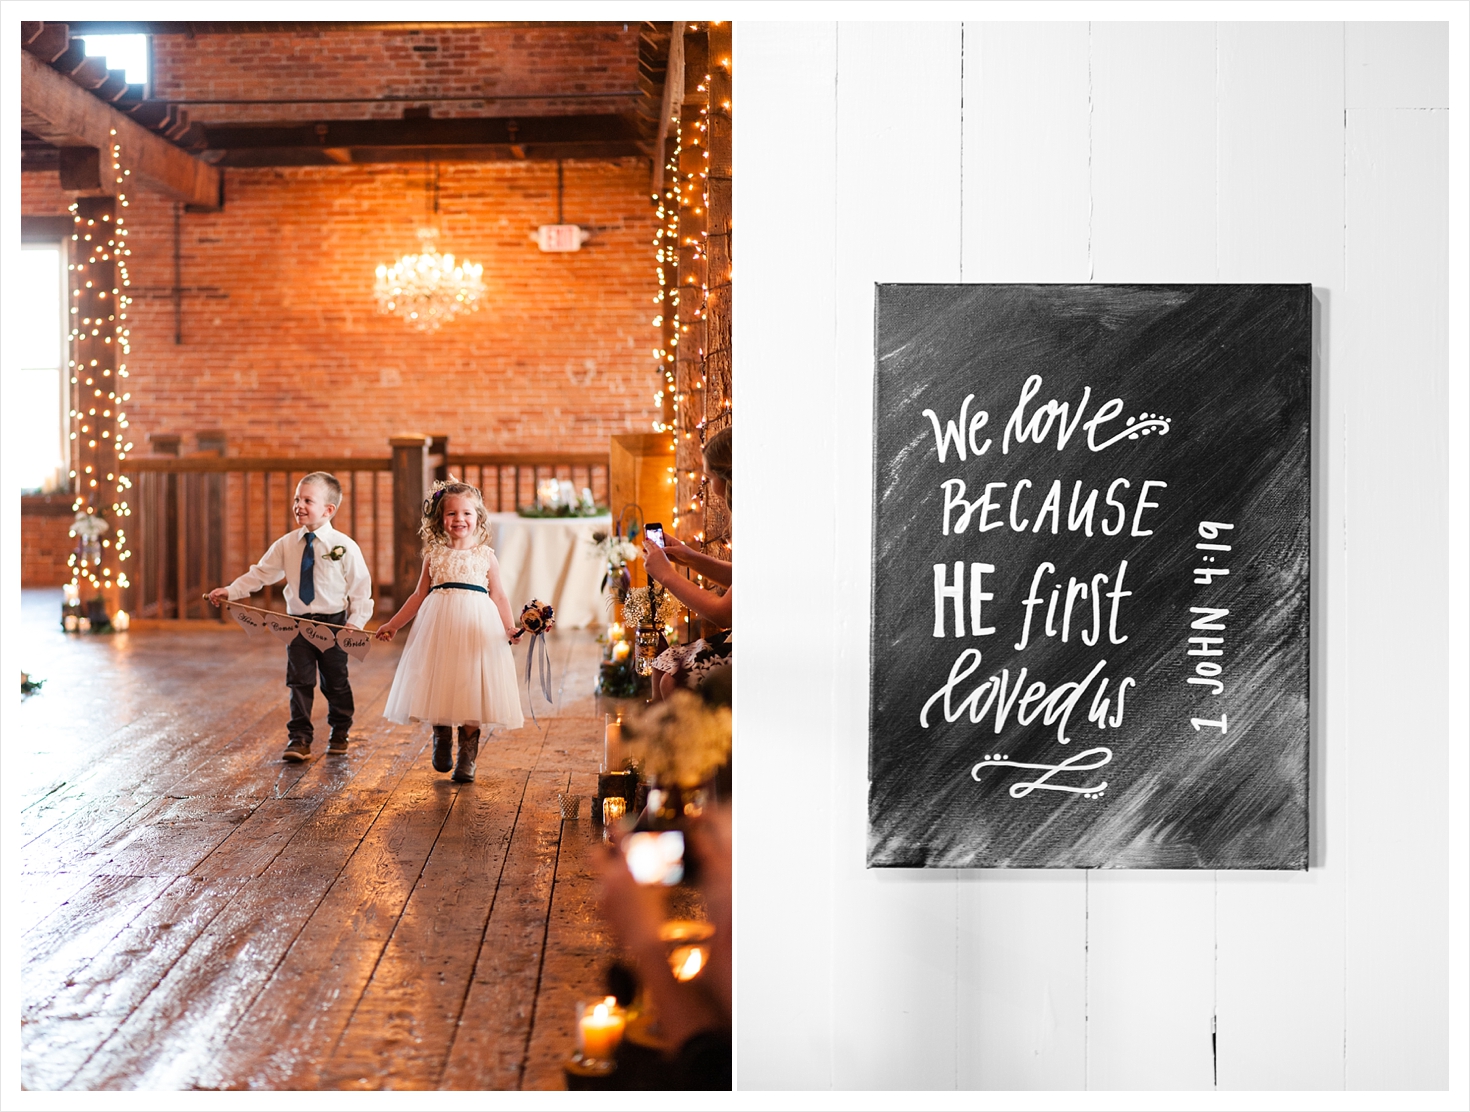 A gorgeous, jewel-toned winter wedding at the Booking House by Fine Art Photographer Lauren R Swann